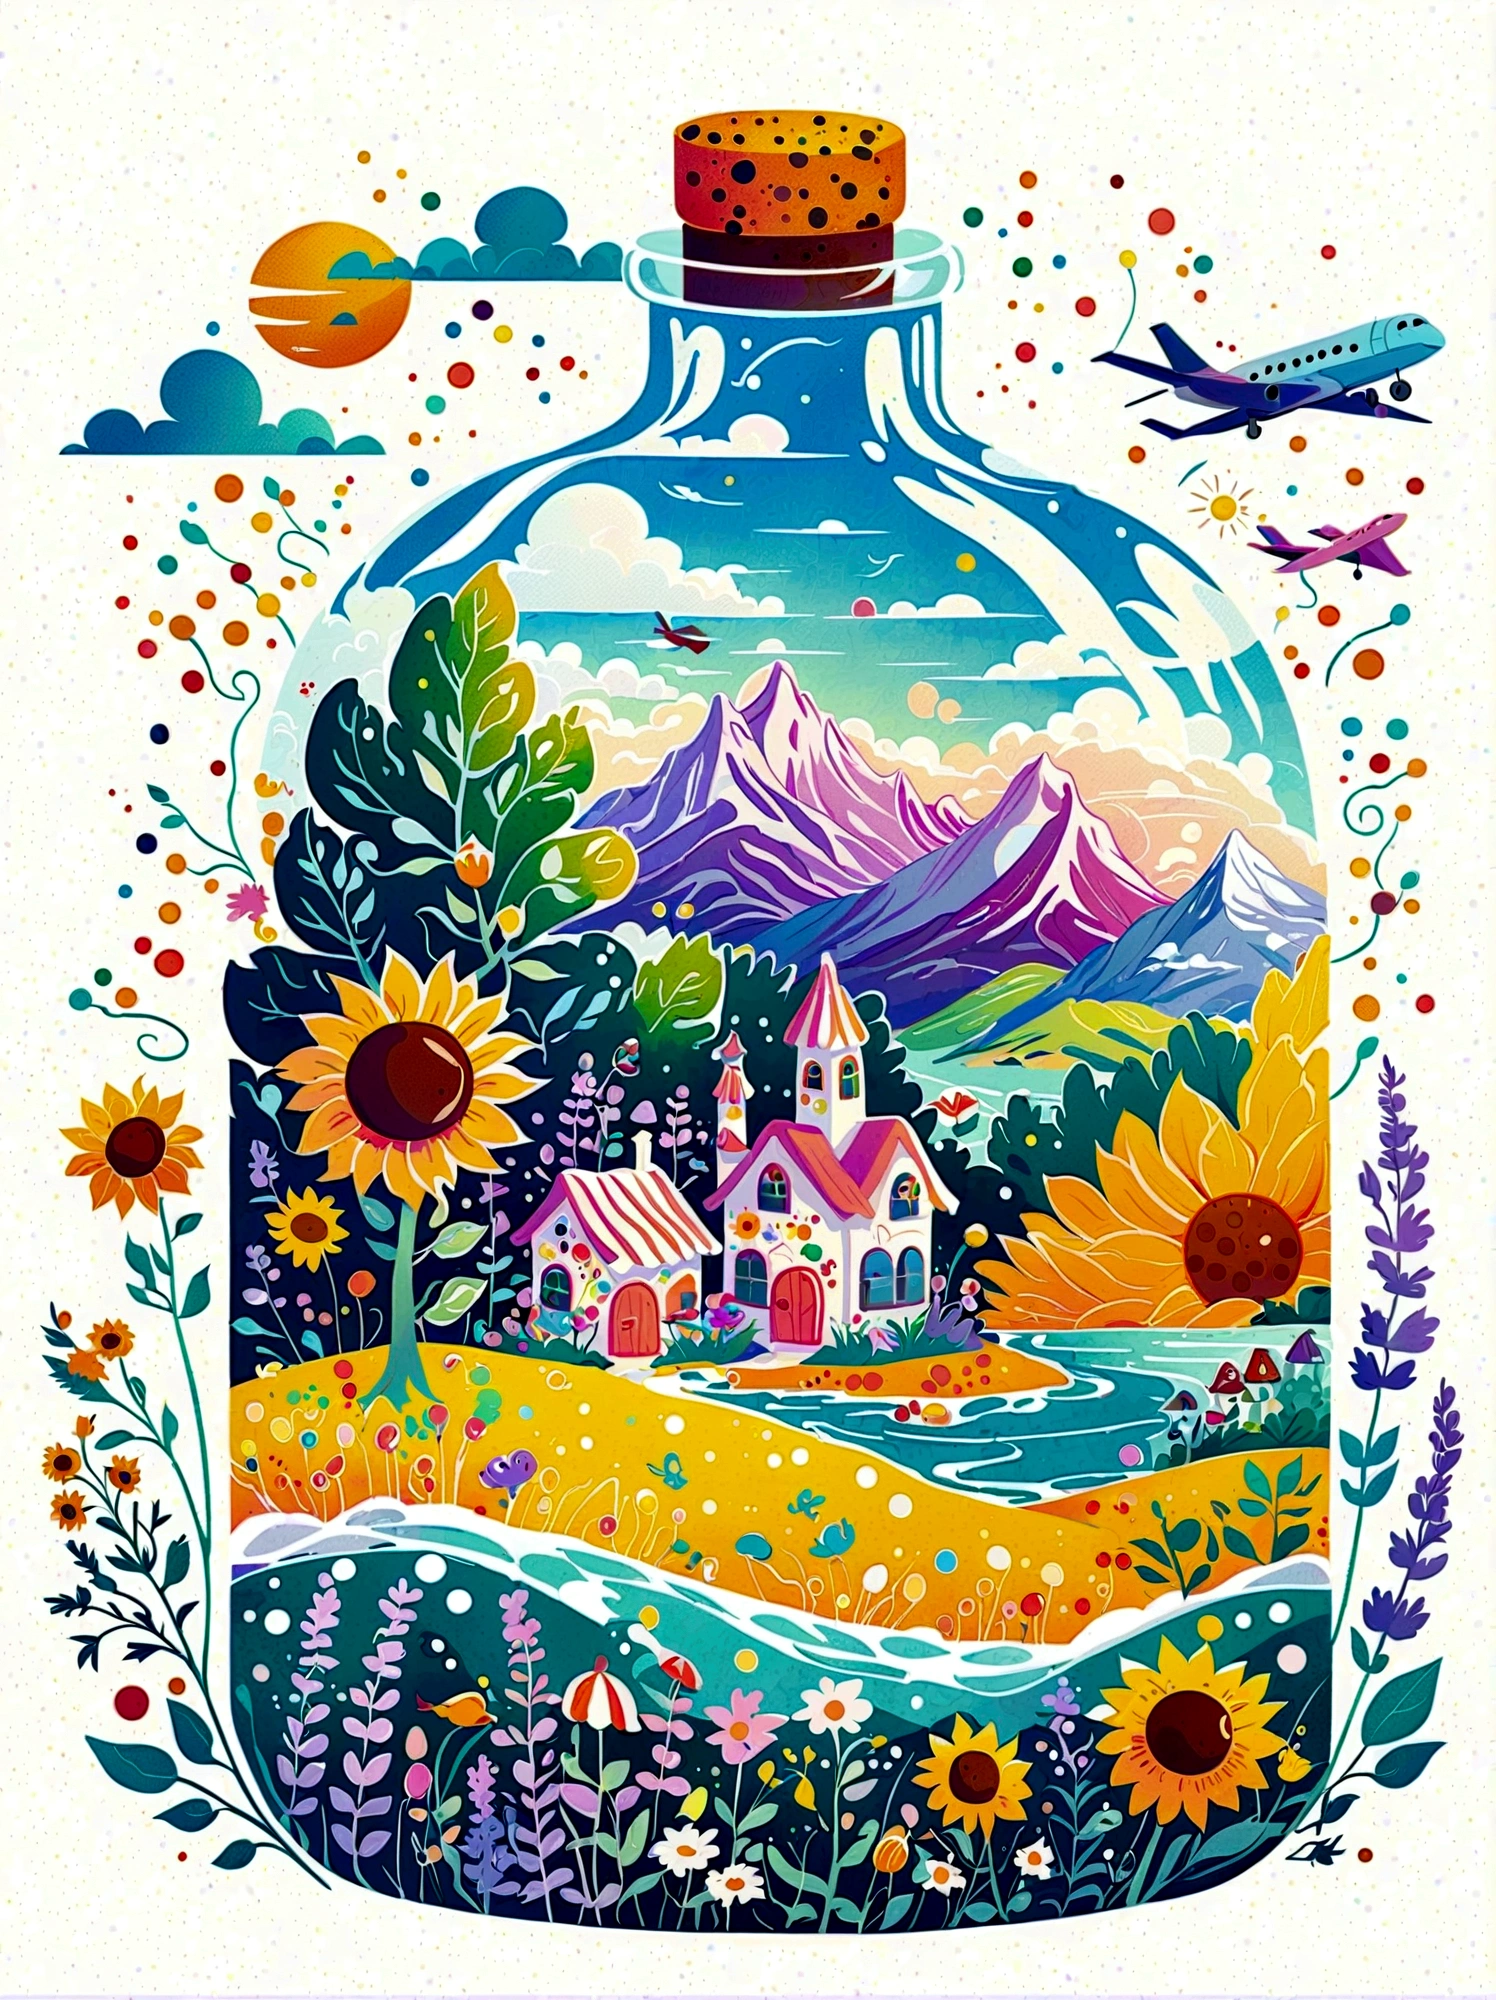 1pzsj1, (flat, user interface vector style), (world in a bottle), heavenly colors, colorful fantasy candy house, fairy tale world, spring, seaside, rios, tree house, sunflower field, lavender, mountains, peaks, big trees, (simple illustration), (smooth line art: 1.2), (minimalism), white background, (graphic design aesthetics), (flat illustration), (Plane illustration)